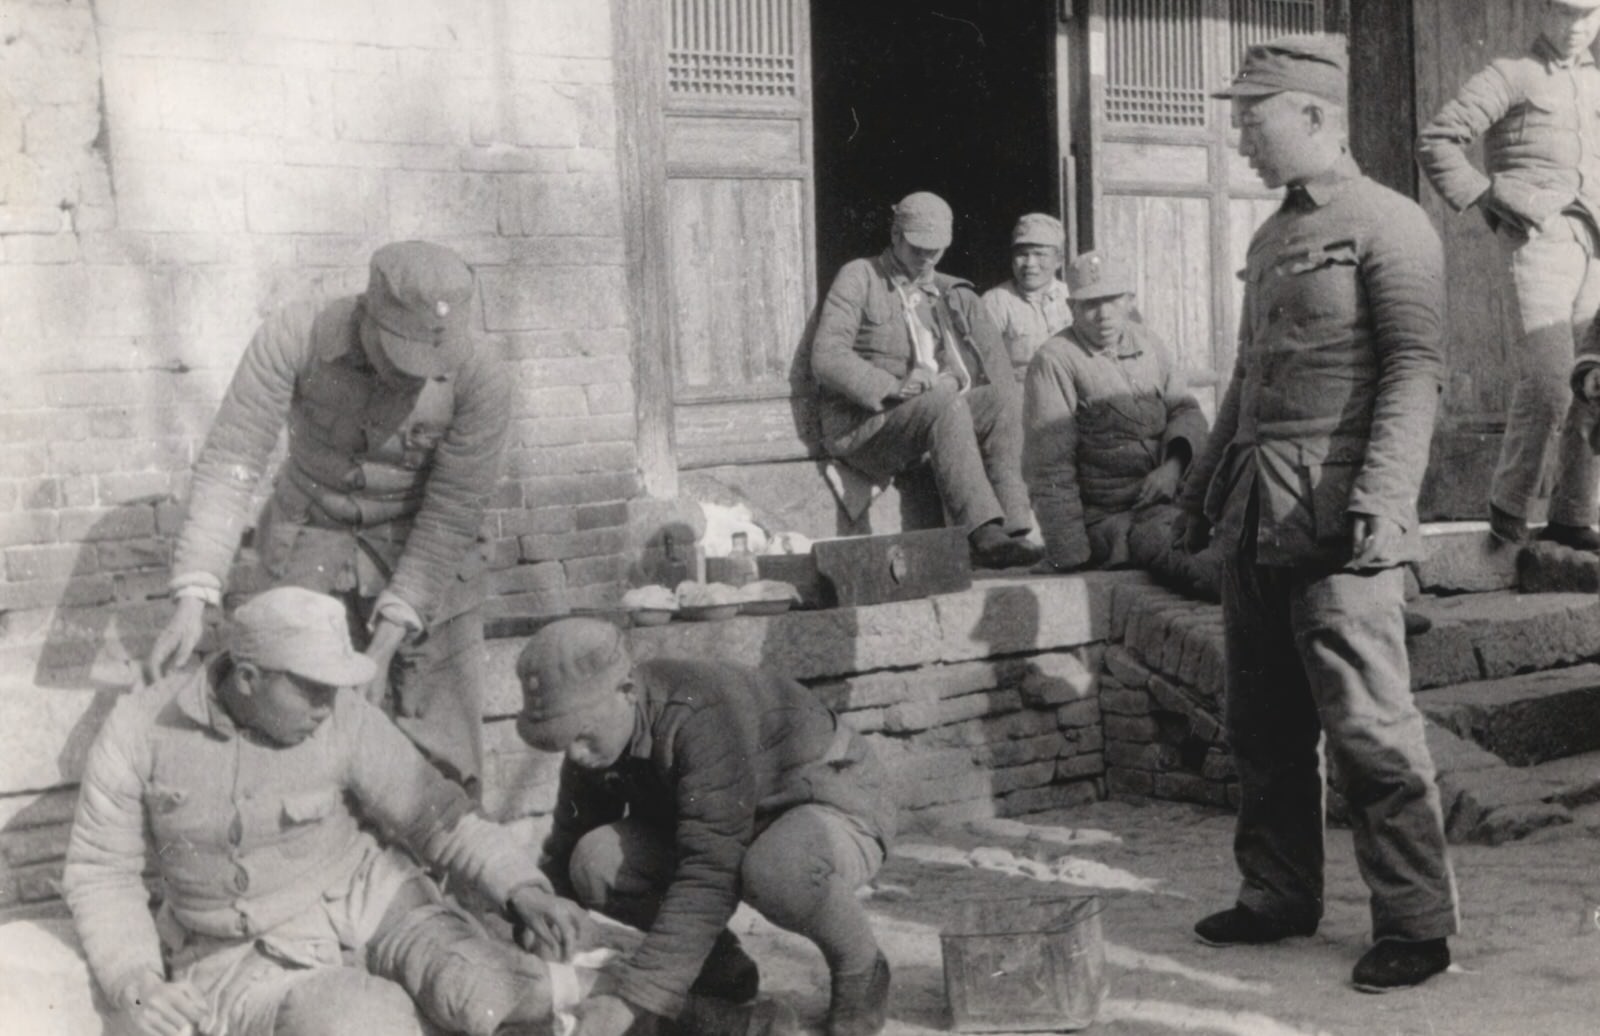 Treating Wounded Soldiers, 1937-1940